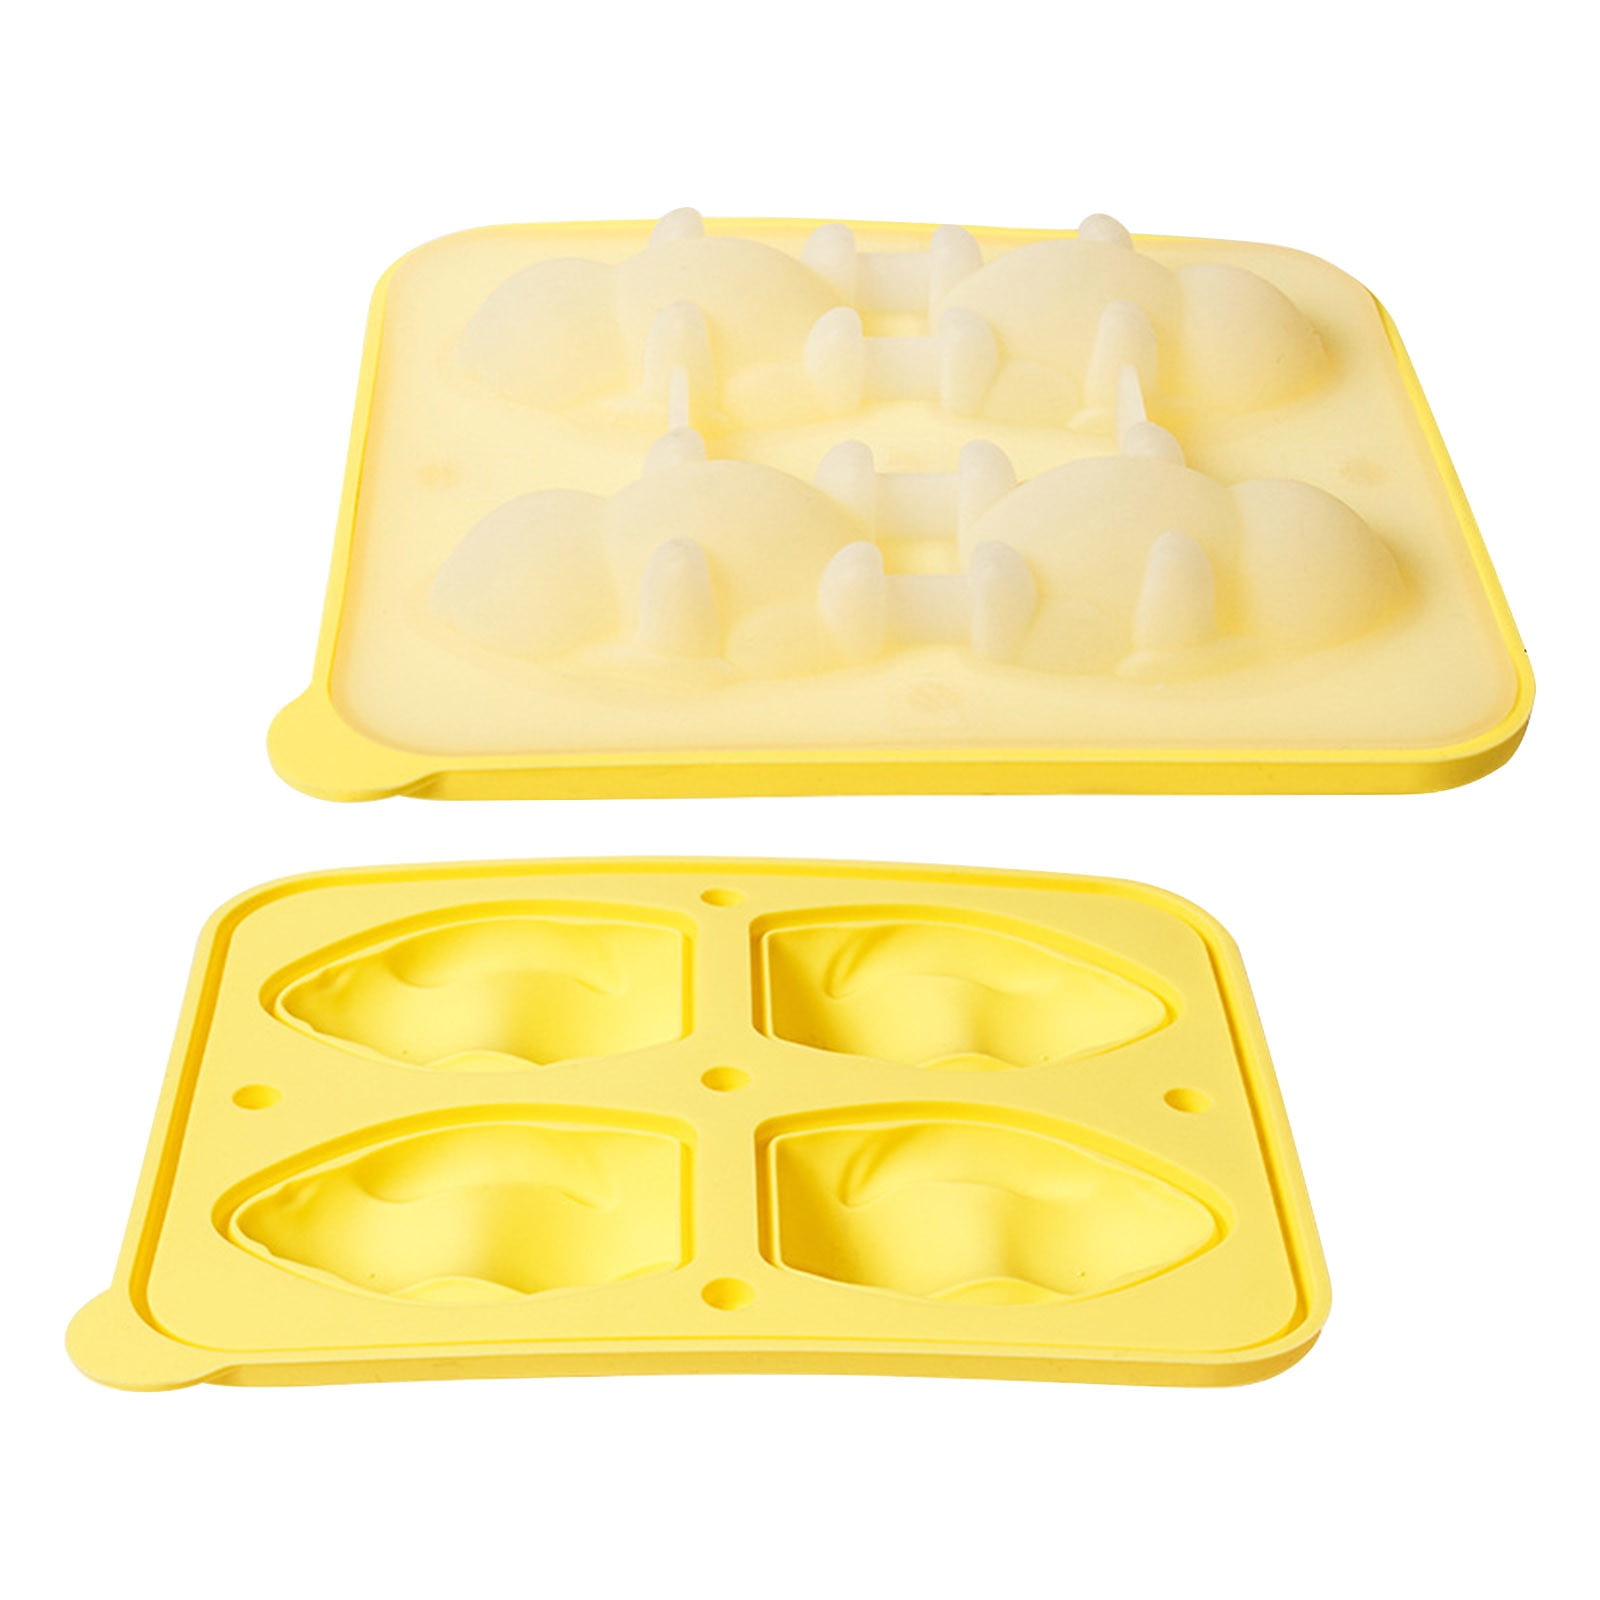 Easter Bunny Face Blue Ice Cube Chocolate Soap Rubber Tray 2 Pack